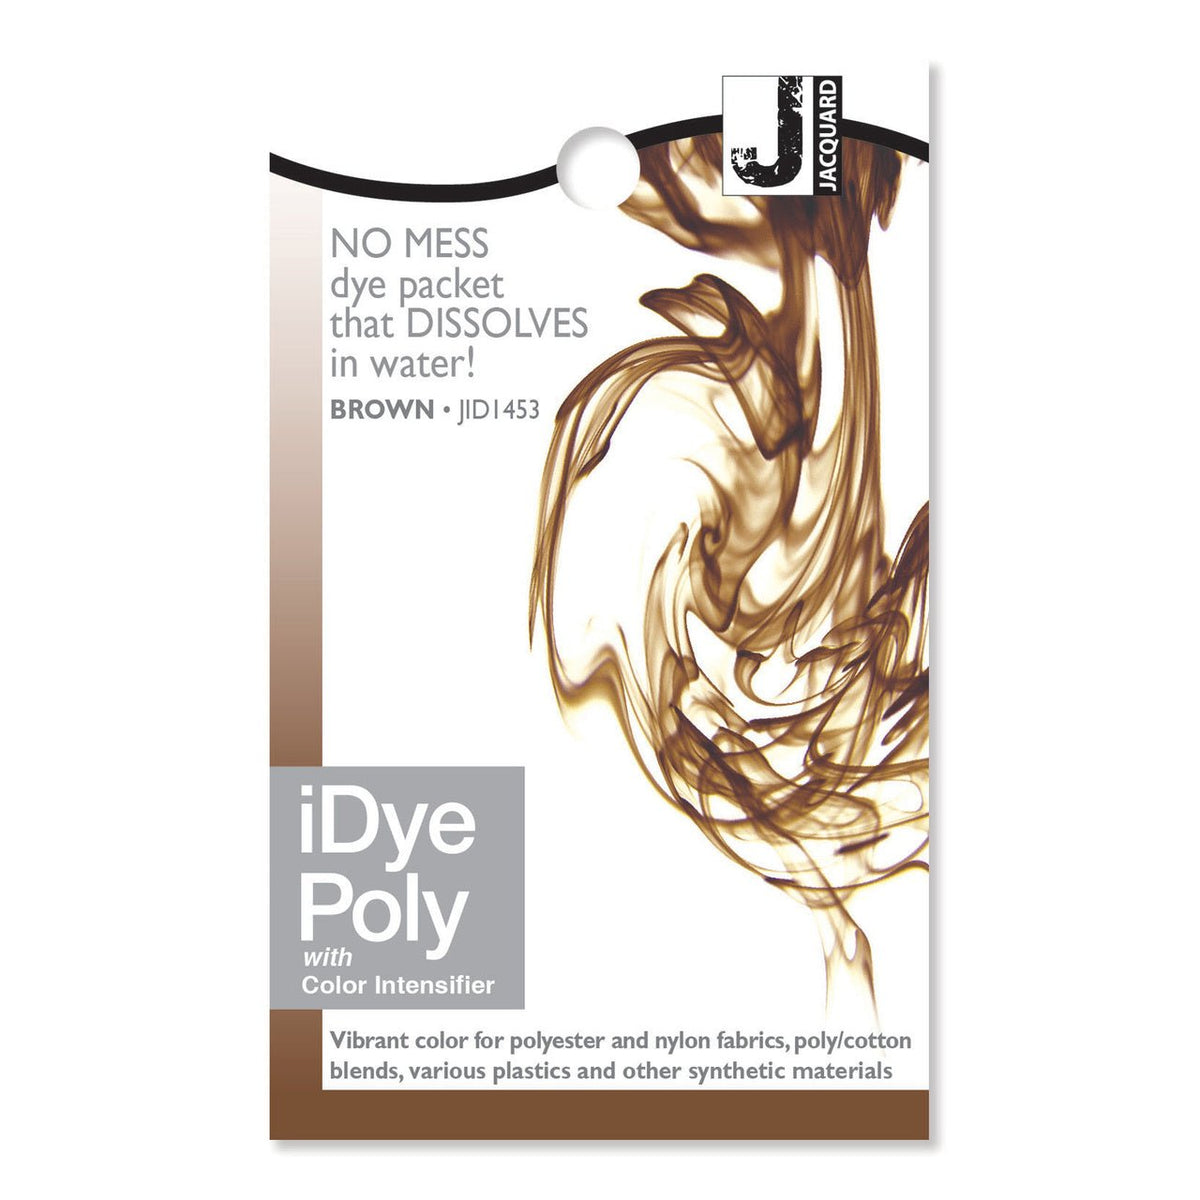 iDye Poly Brown Polyester and Nylon) - merriartist.com